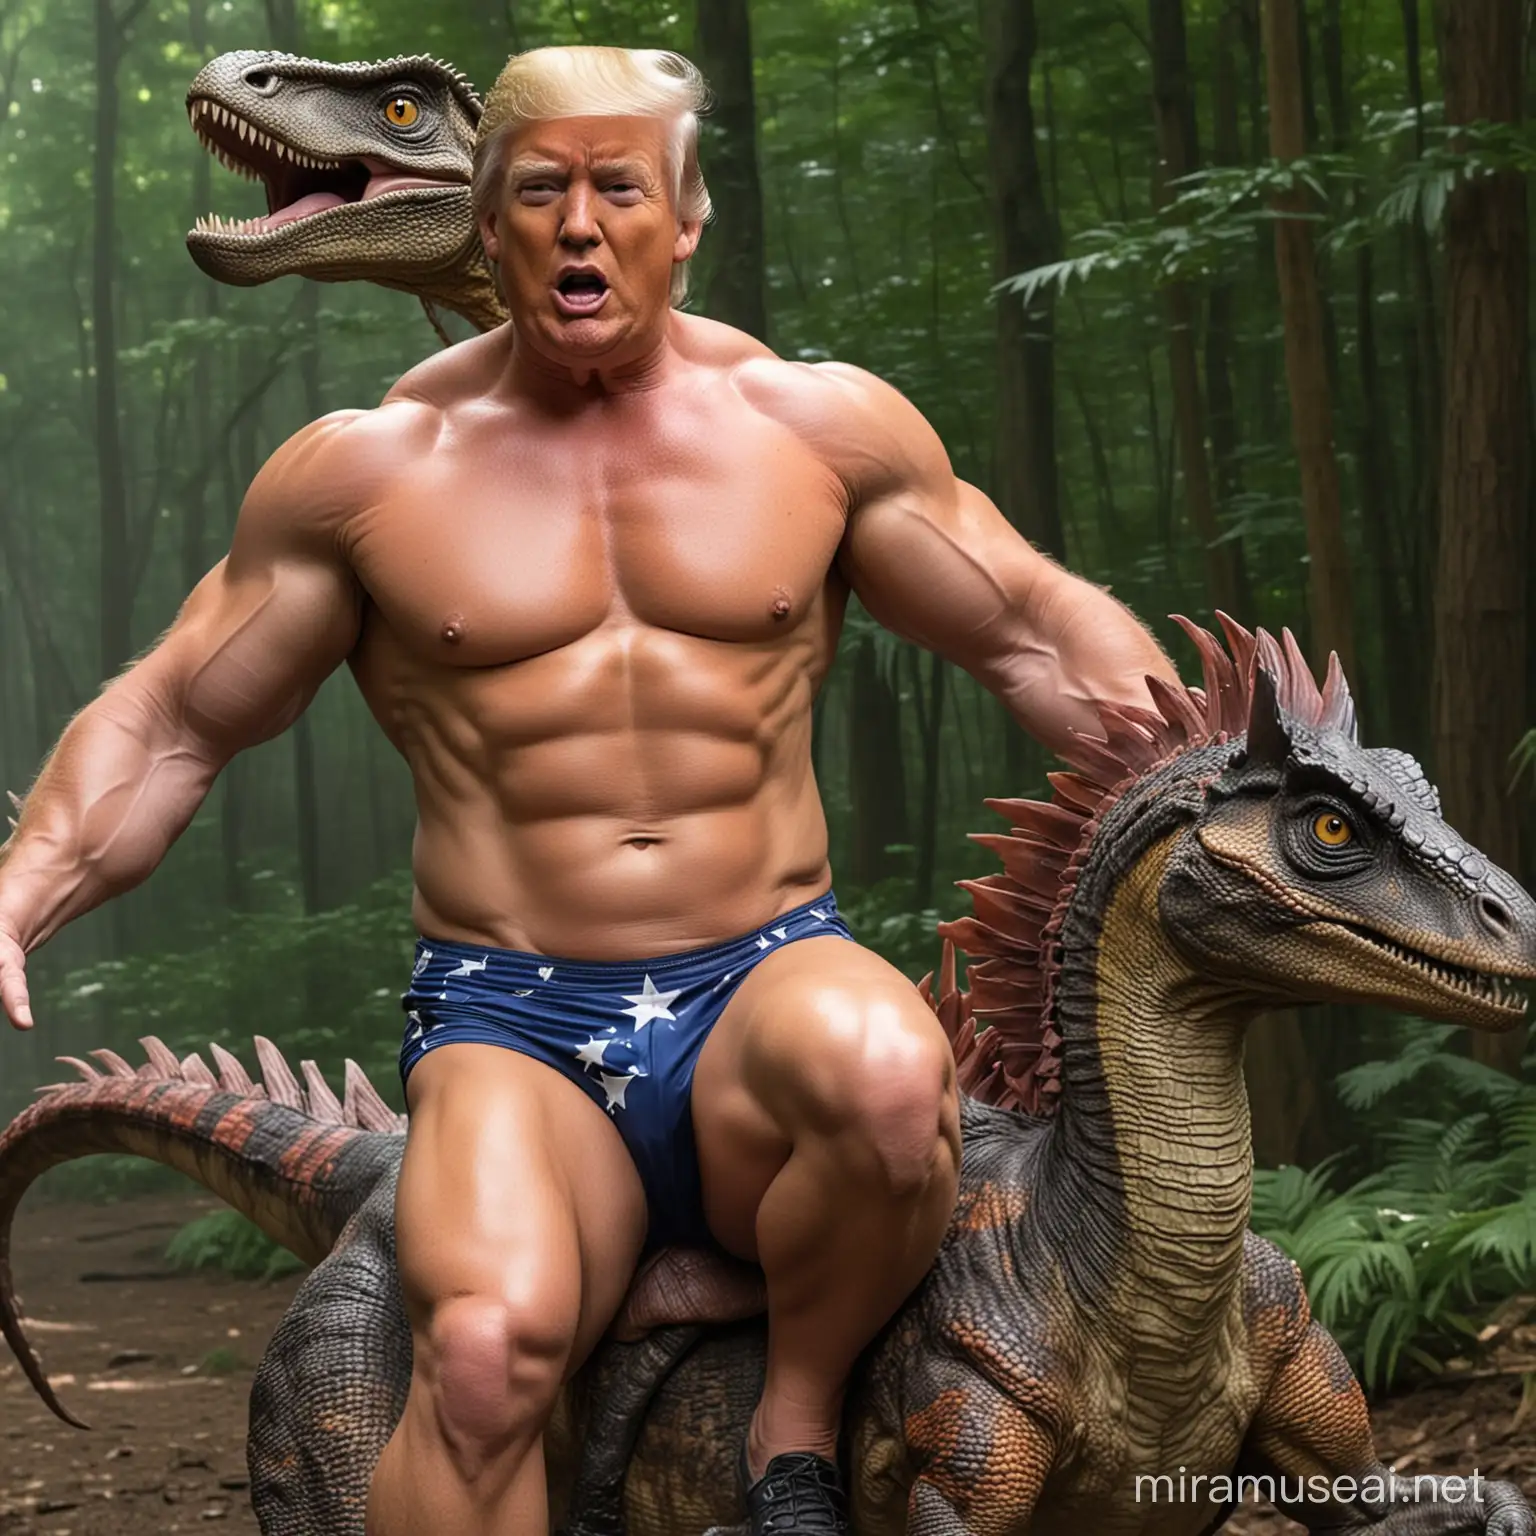 maga loves their make believe world of a shirtless muscle bound trump riding a velociraptor so let’s snap them back to reality with overweight Trump